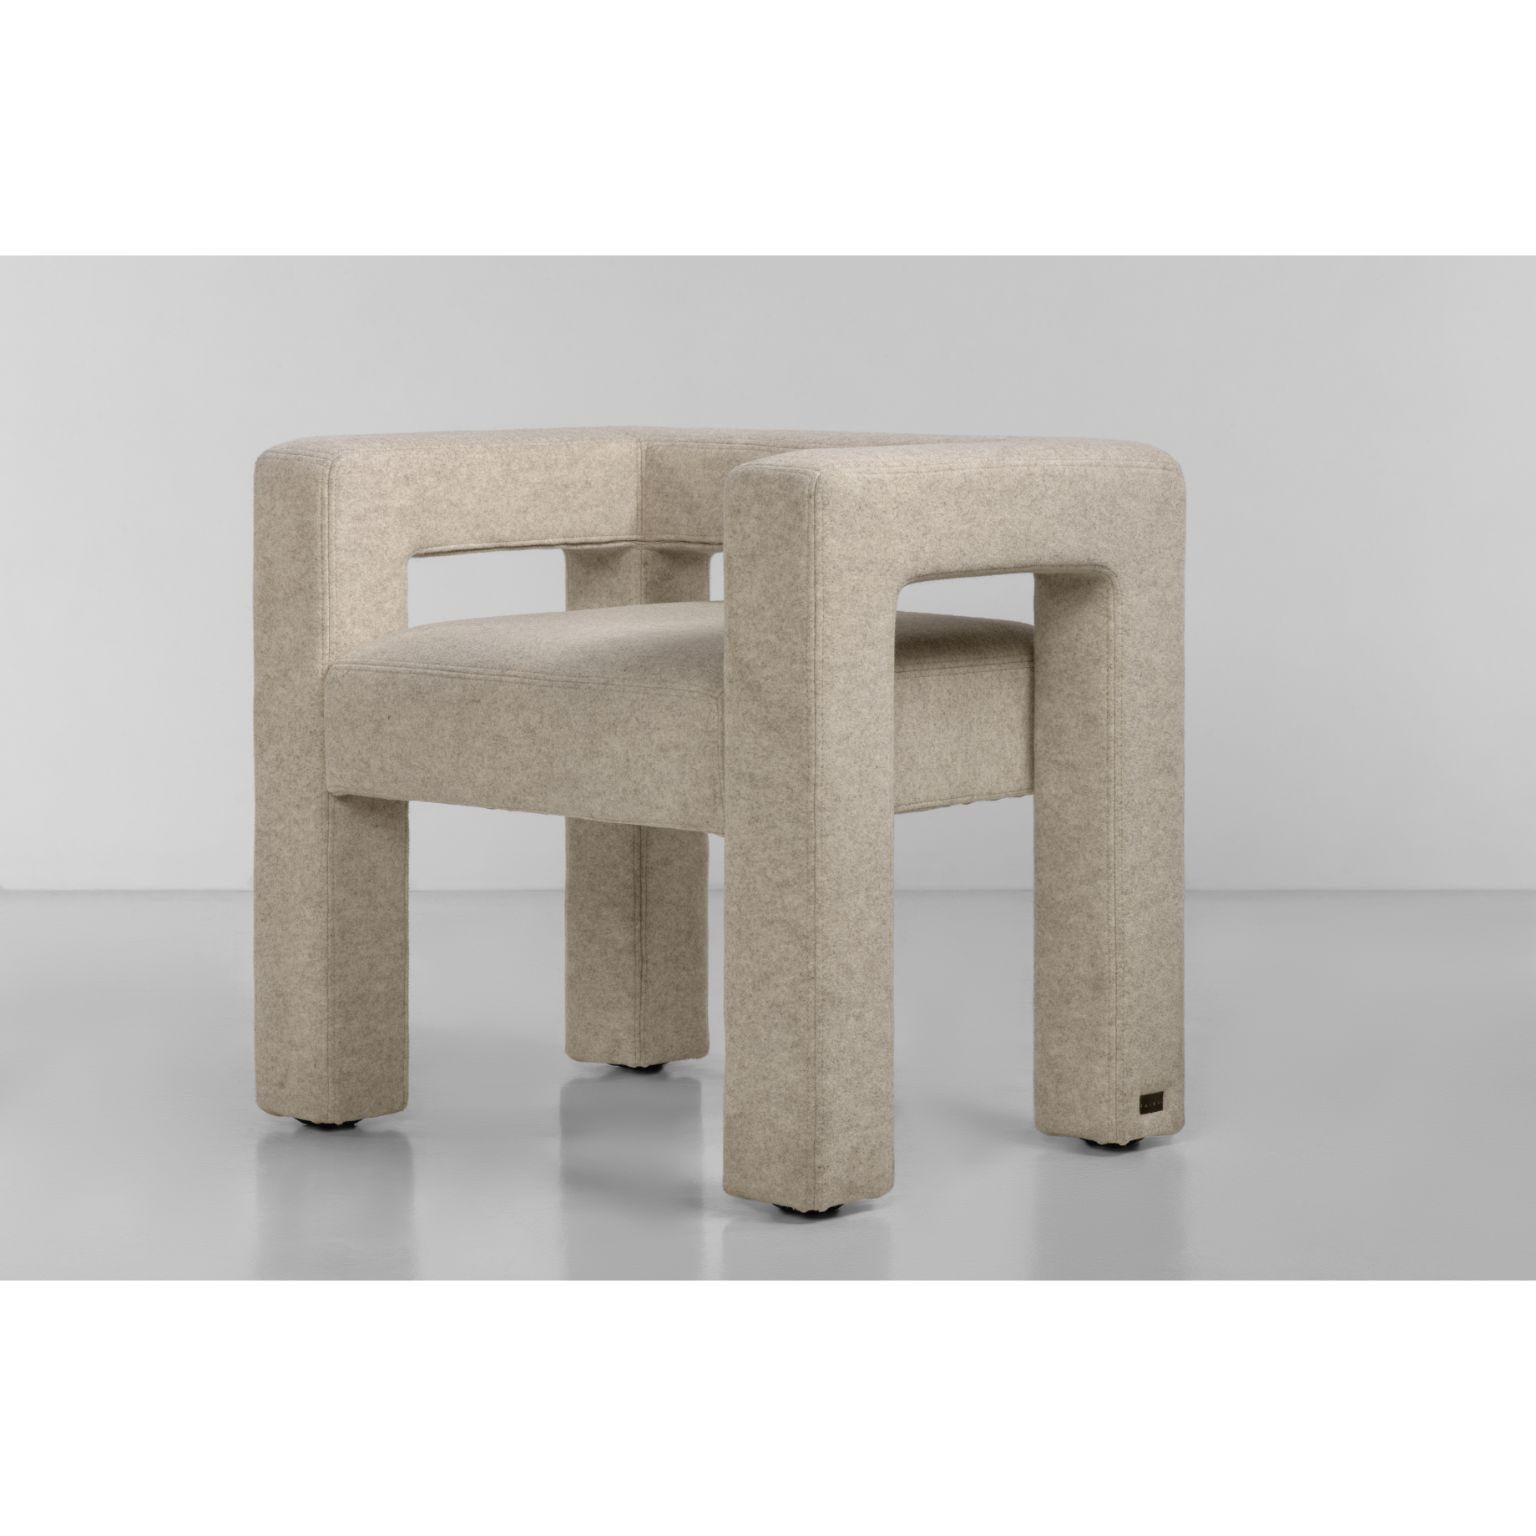 Contemporary armchair by FAINA
Design: Victoriya Yakusha
Material: Textiles, Foamrubber, Sintepon, wood, plywood
Dimensions: 45 x 76 x 67 cm
Weight: 20 kg

In search of new-old design messages, Victoria Yakusha conducted a study of the daily